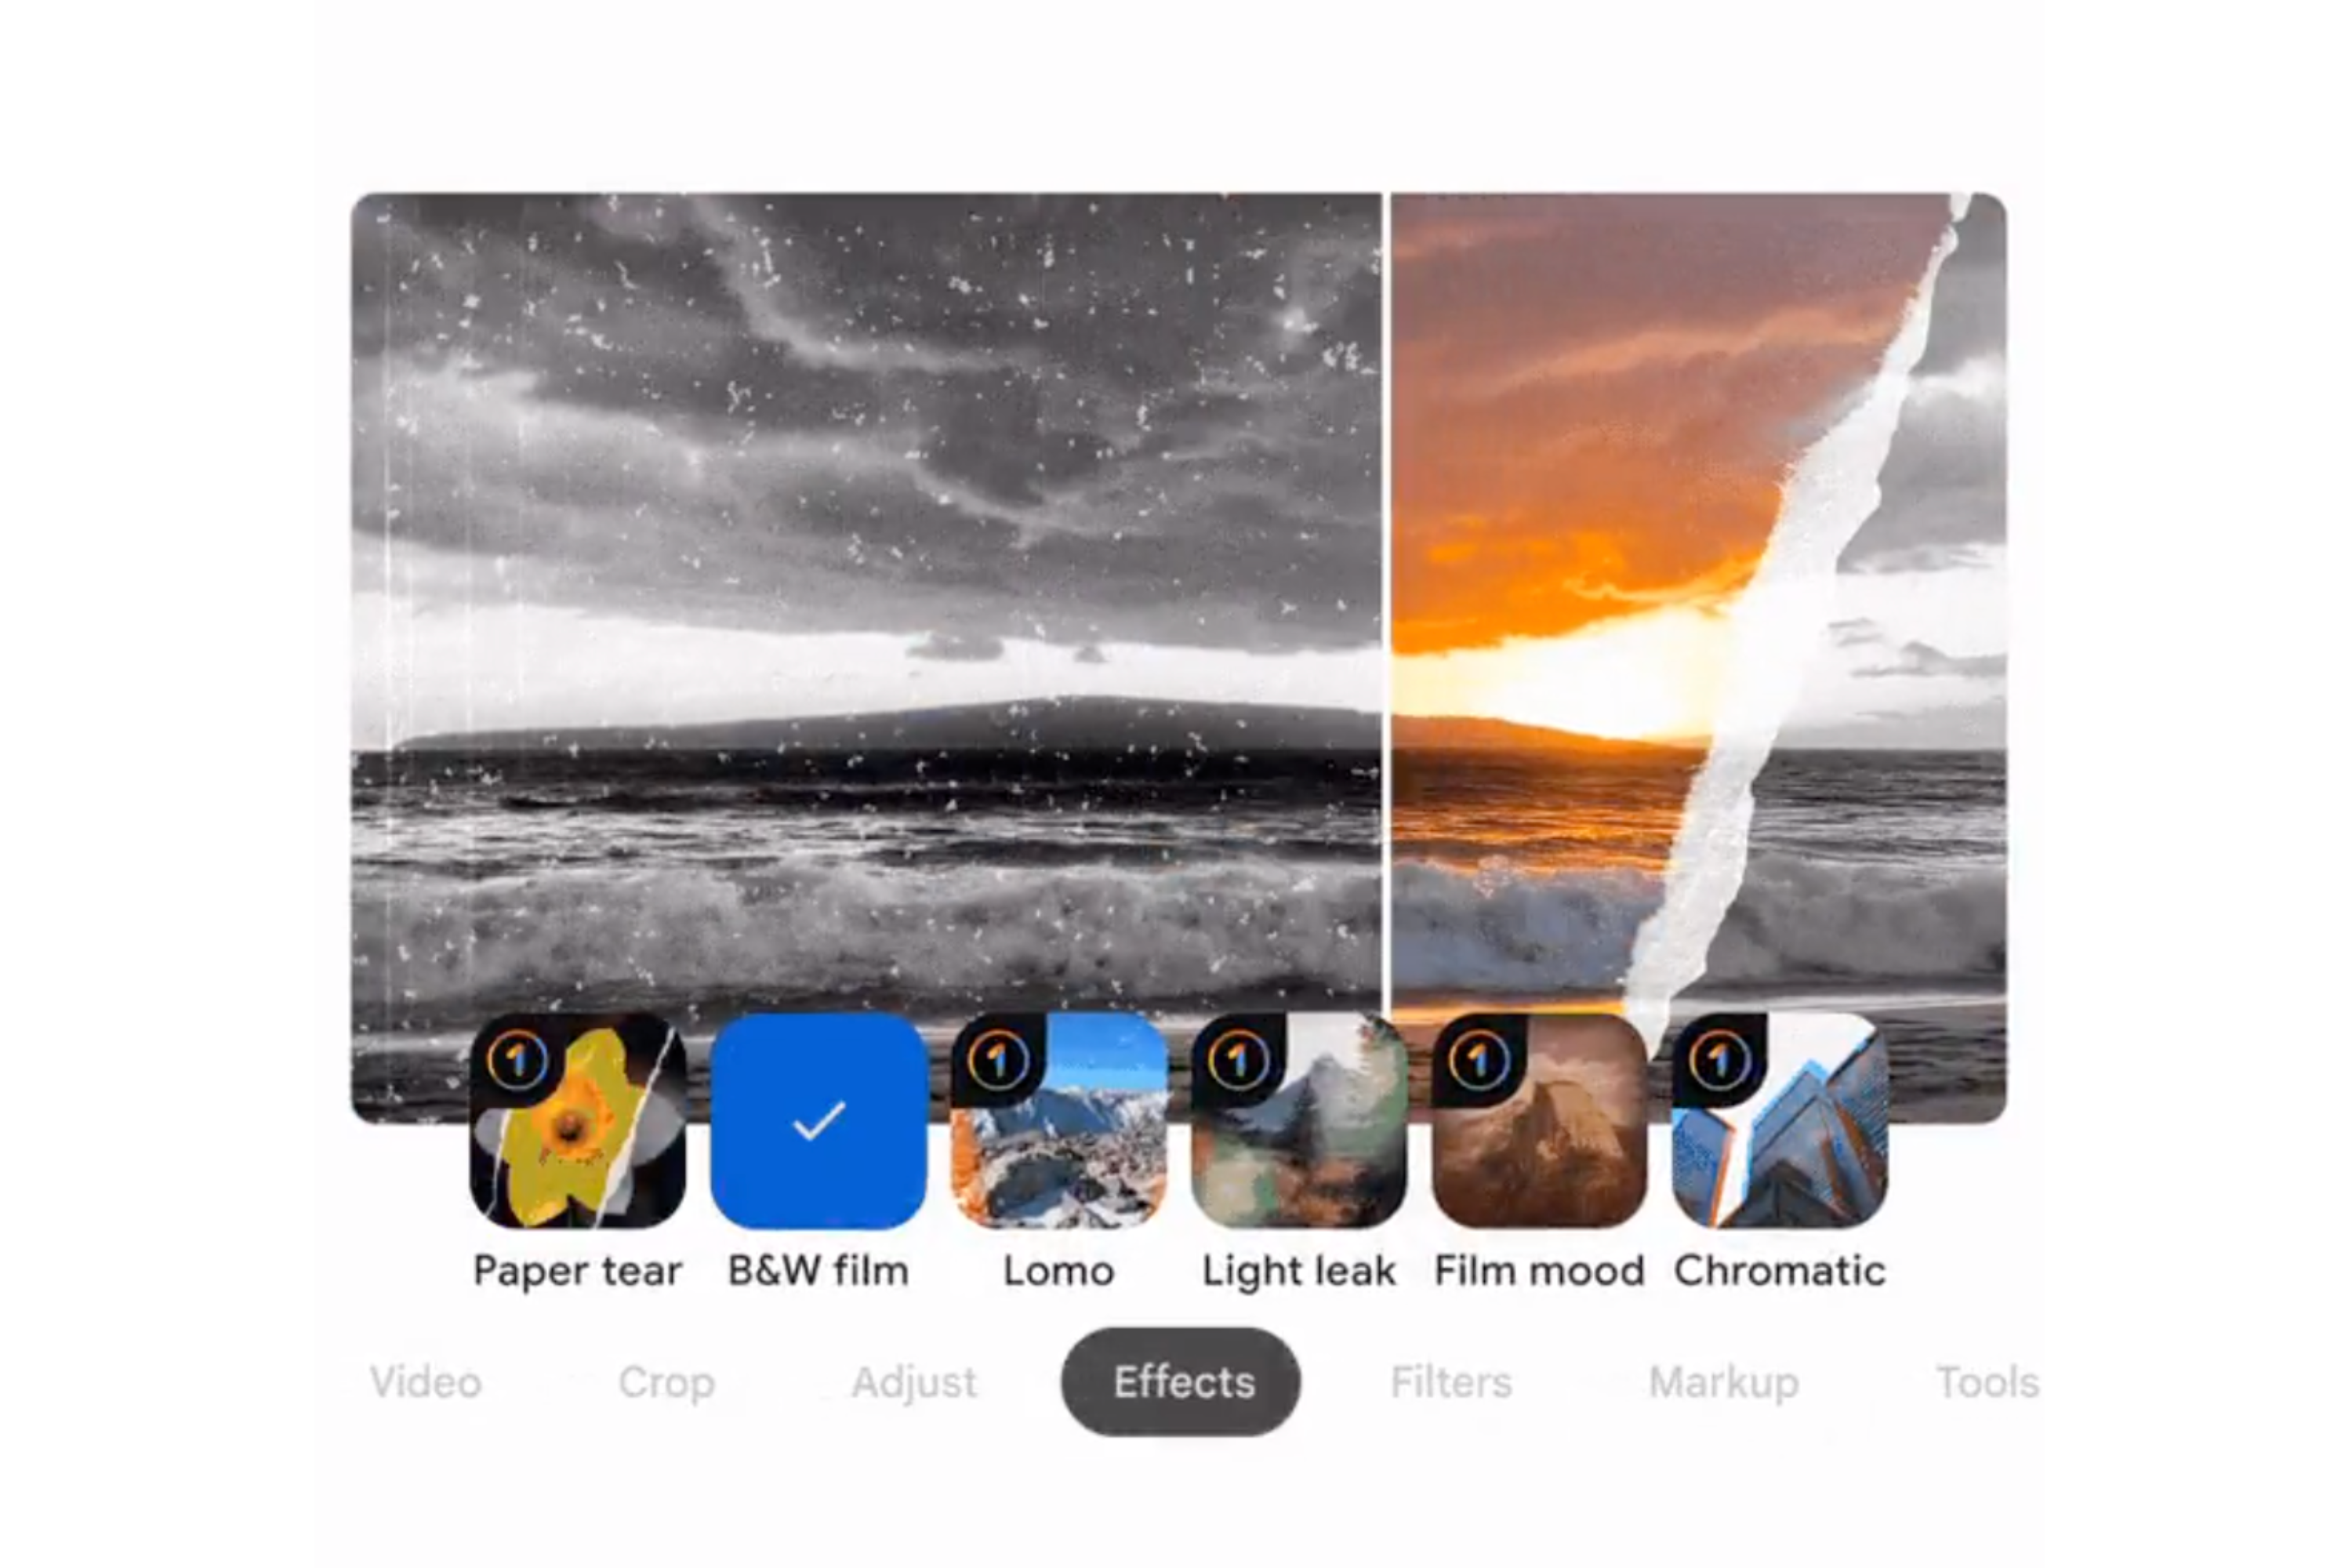 Google Photos menu showing different video effects like paper tear, BW film, light leak and more